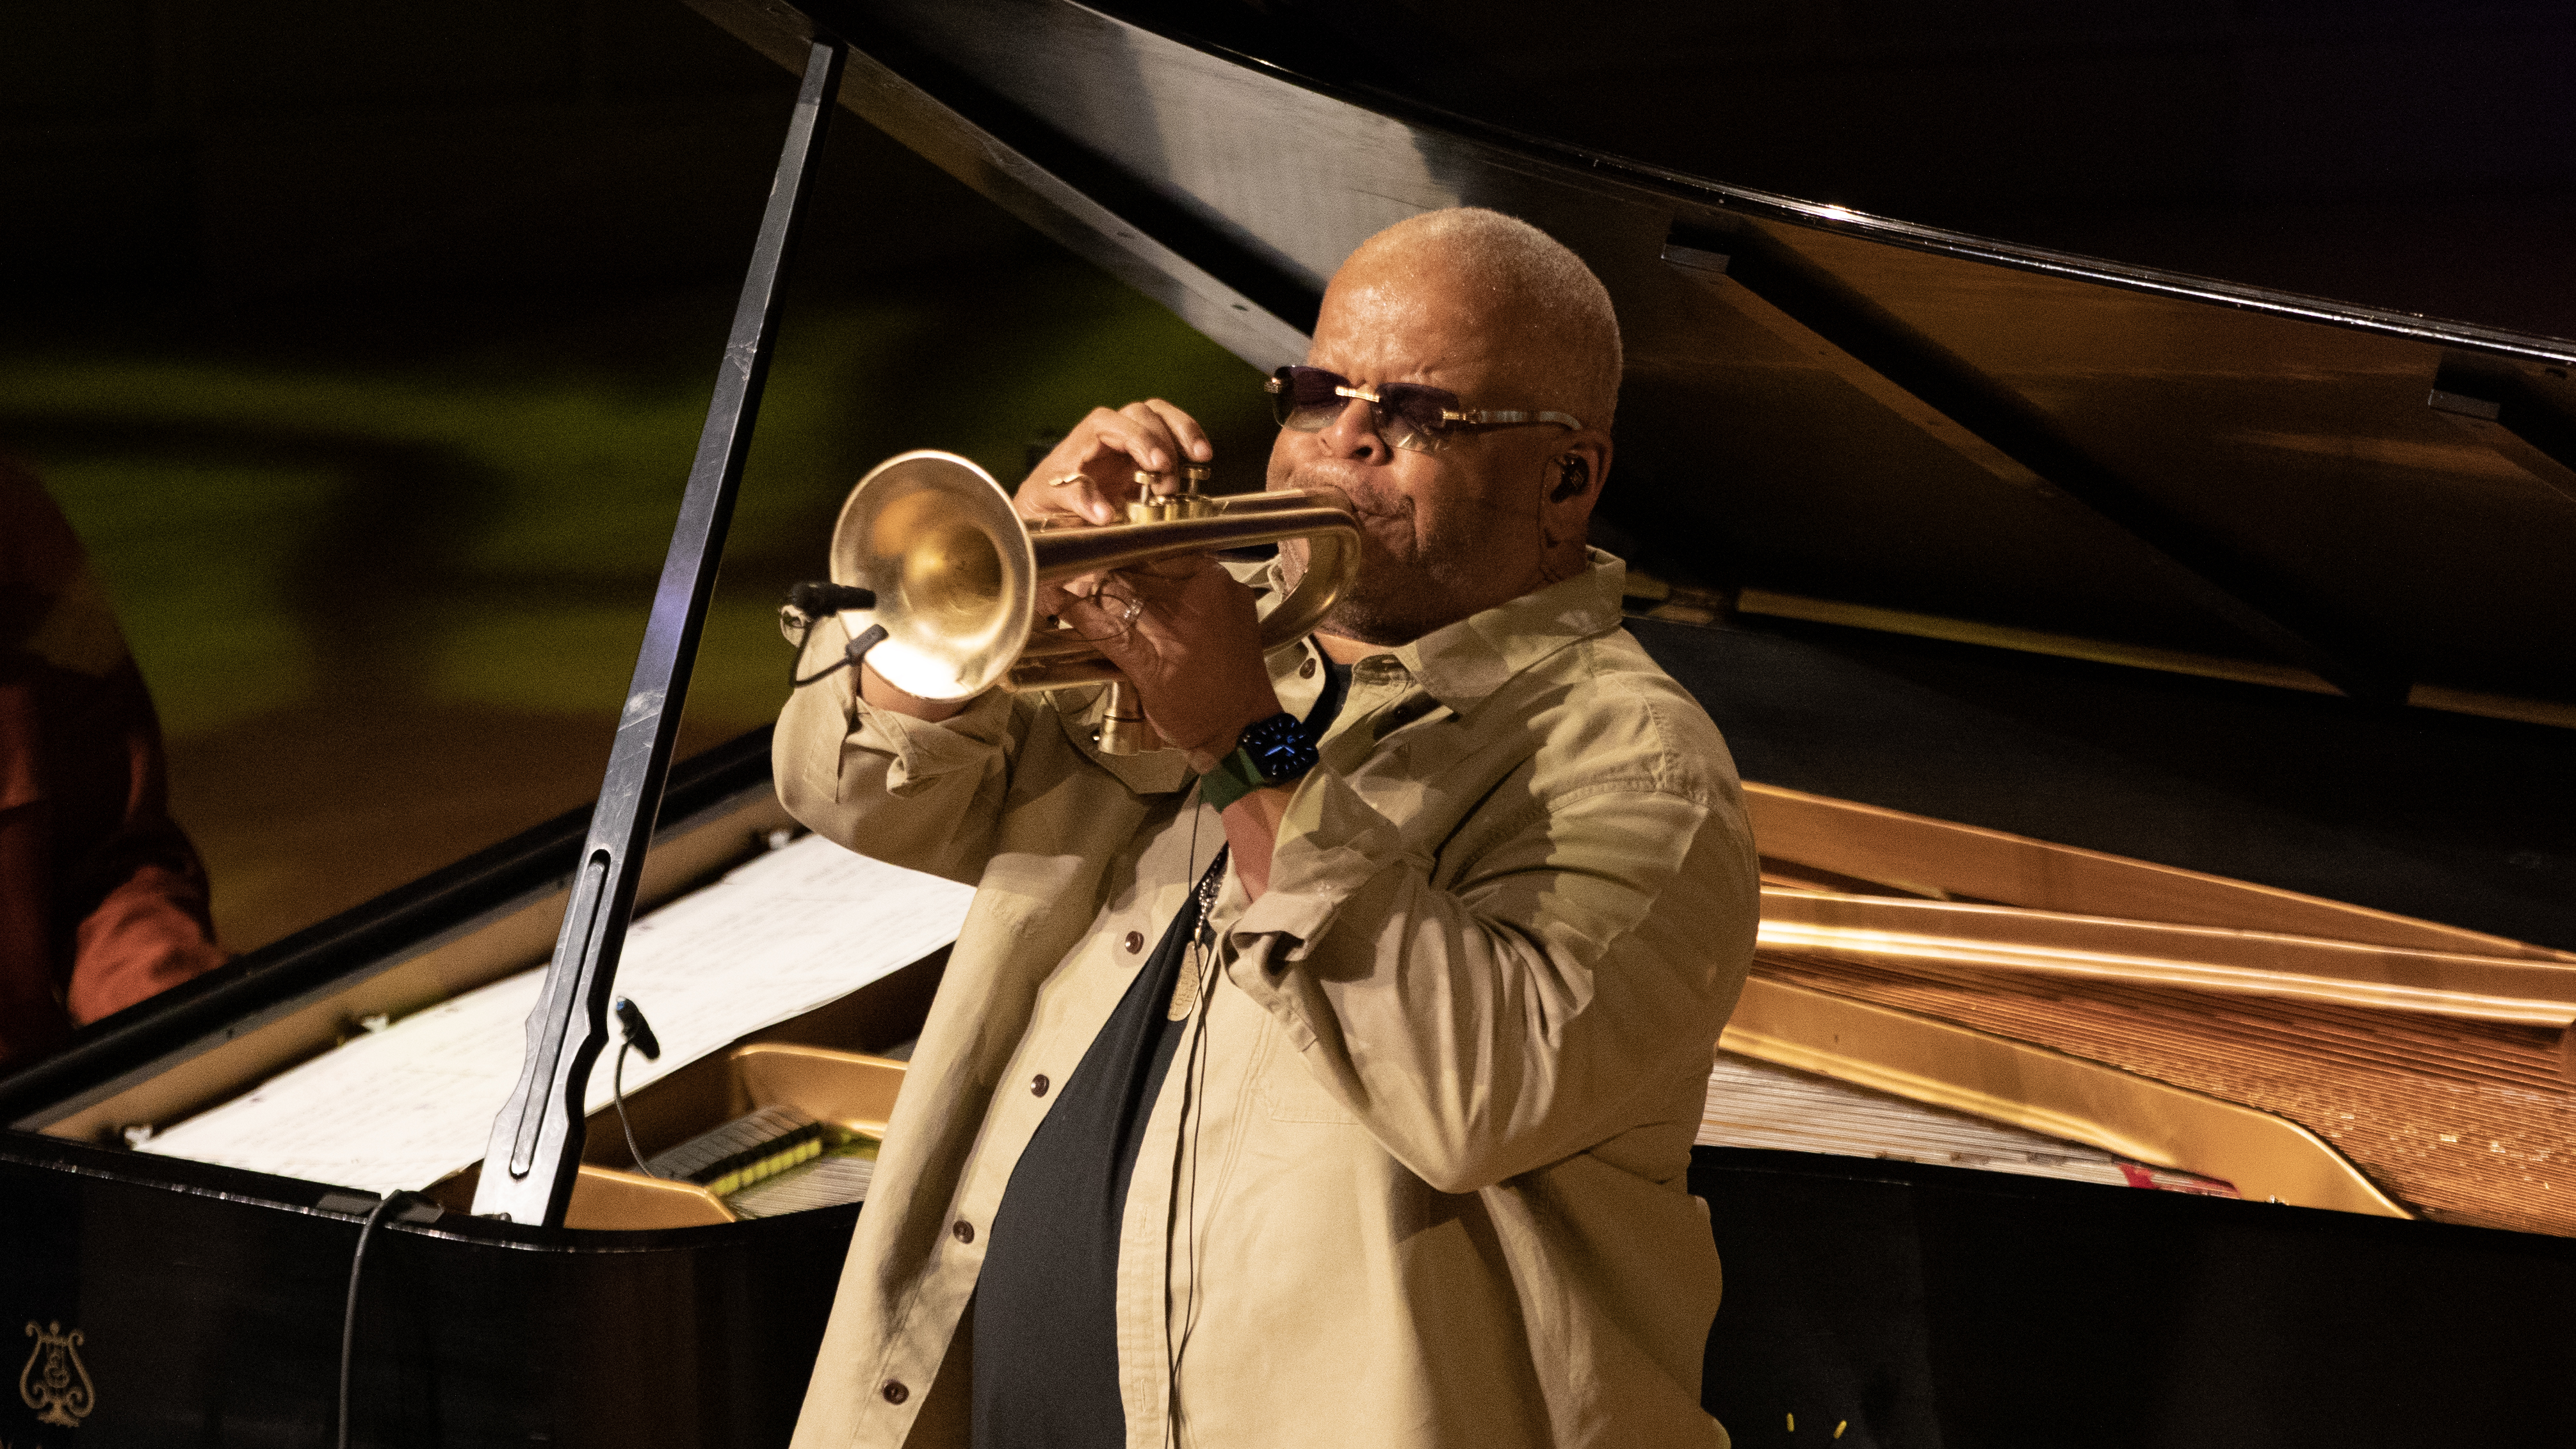 Check out Terence Blanchard in Dallas airing on a public television station near you!